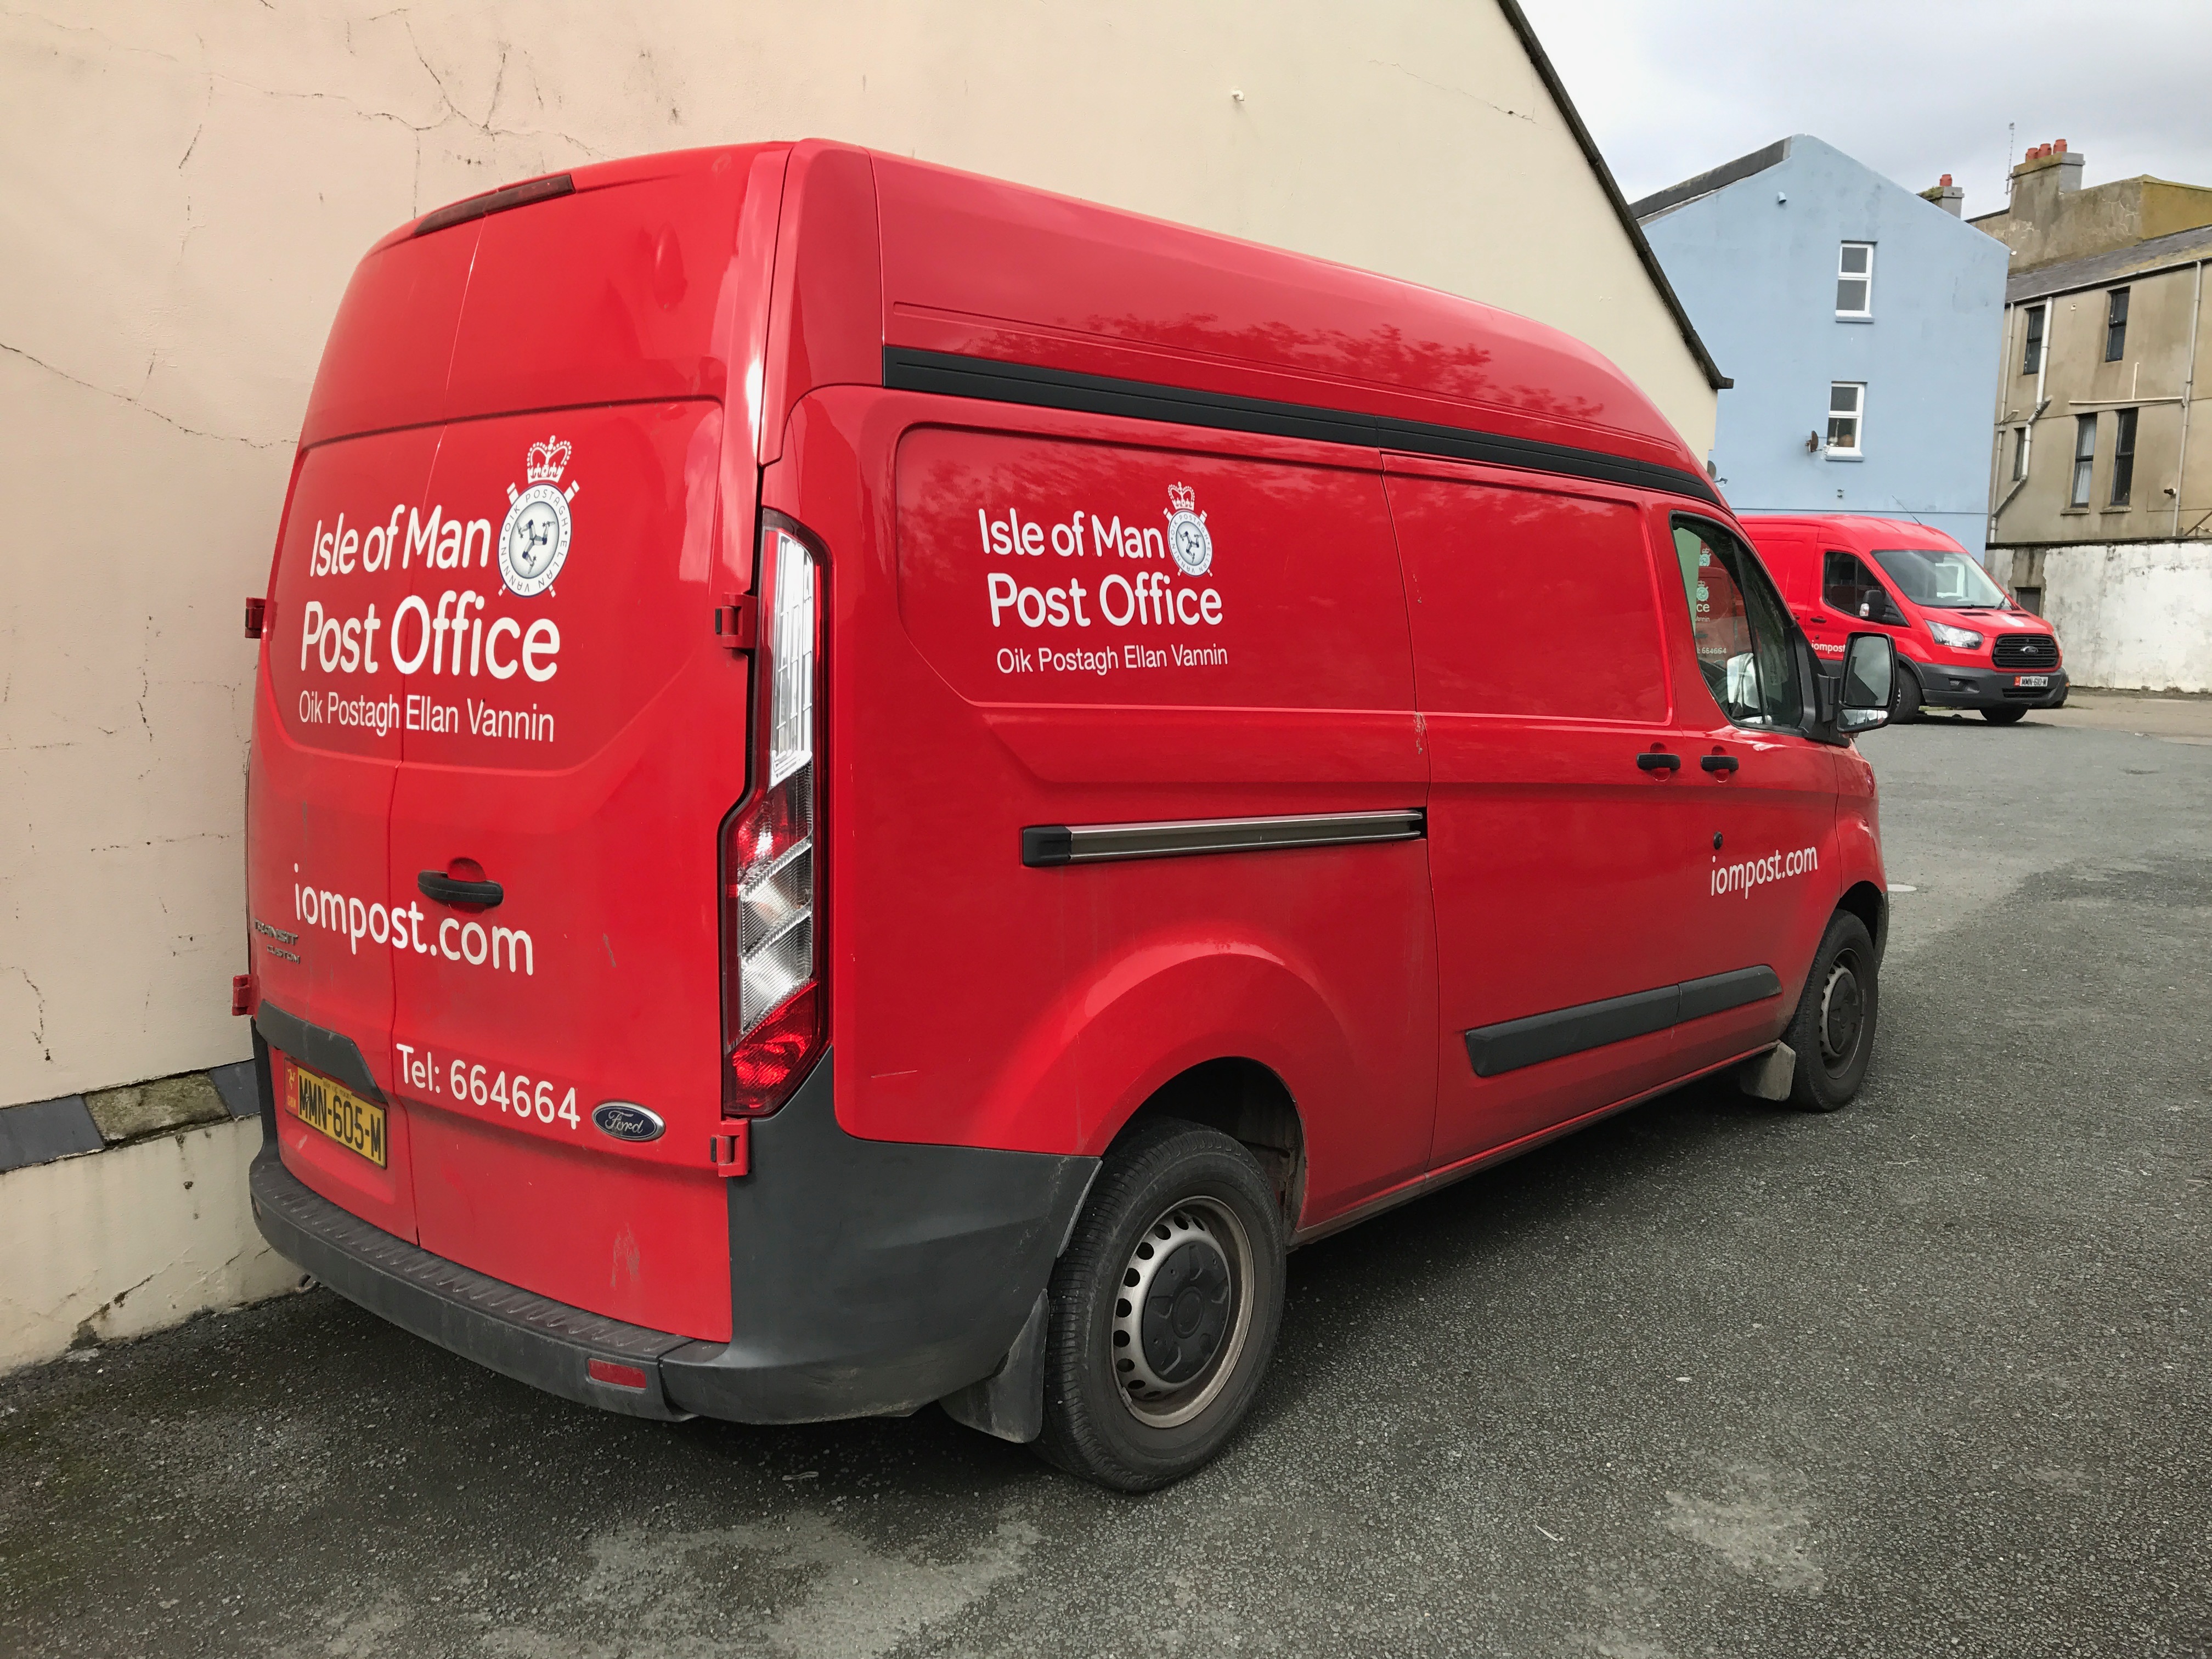 Two delivery vehicles of the Isle of Man Post Office (Oik Postagh Ellan Vannin) in the Post Office yard at Peel. Photo taken on September 5, 2017.